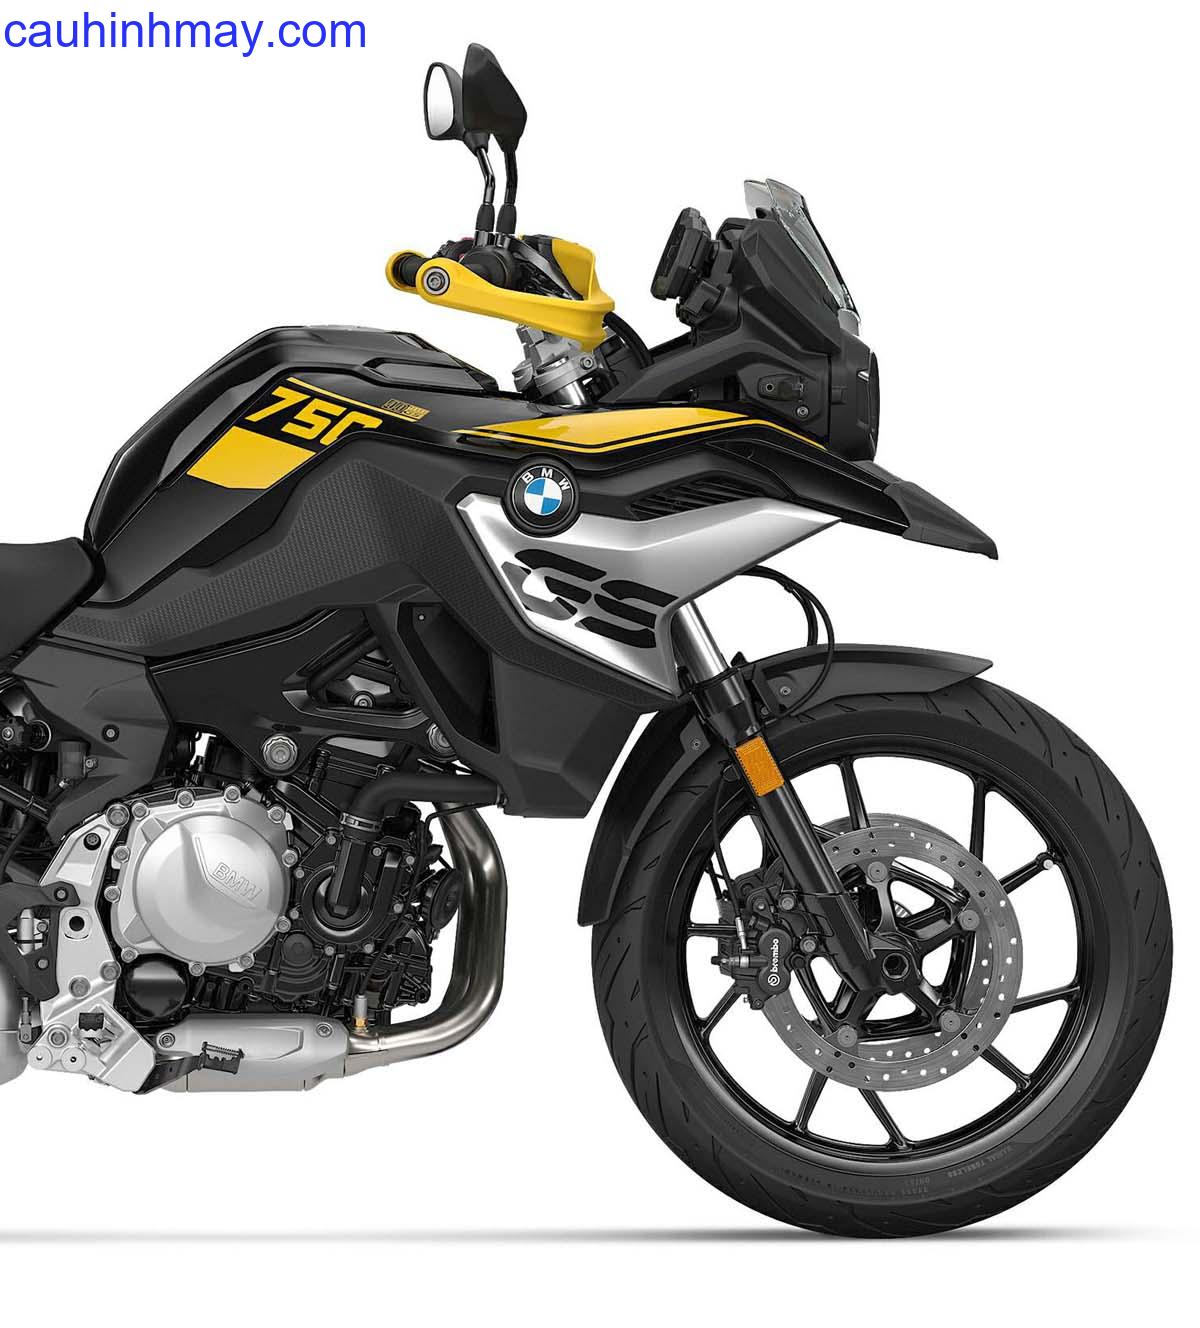 BMW F 750GS 40 YEARS EDITION - cauhinhmay.com